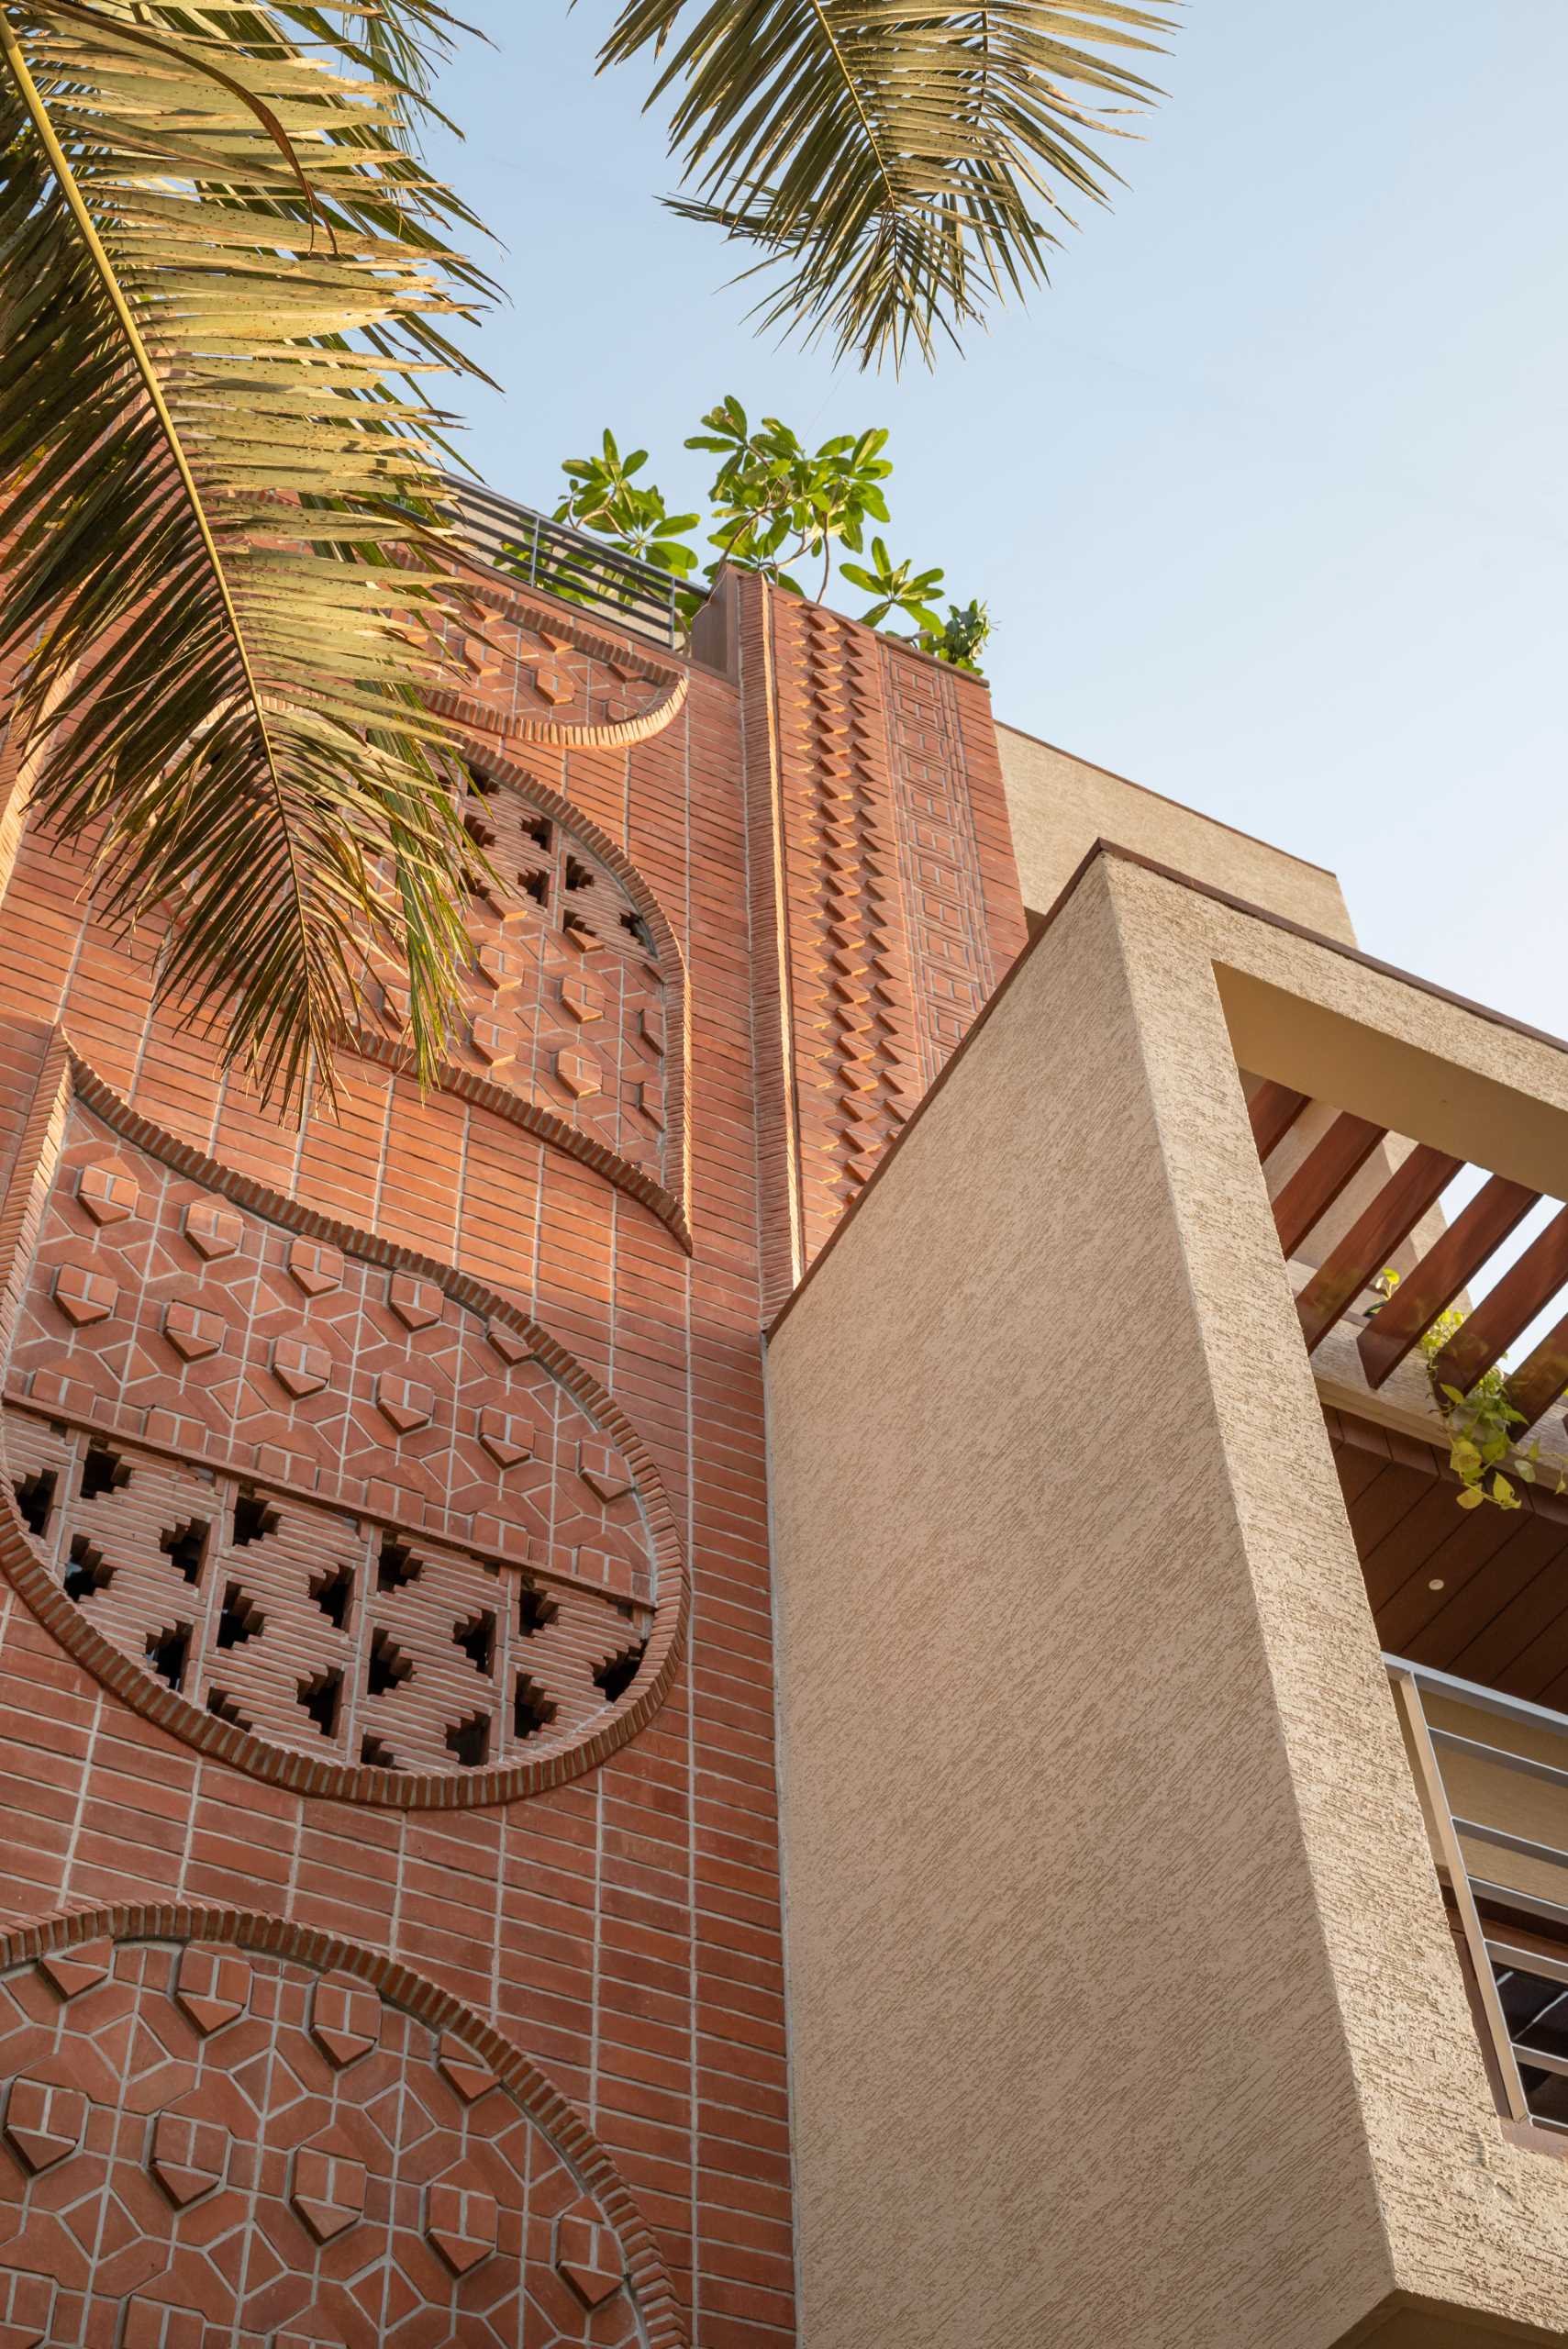 A modern home facade with a variety of brick patterns and unique designs.